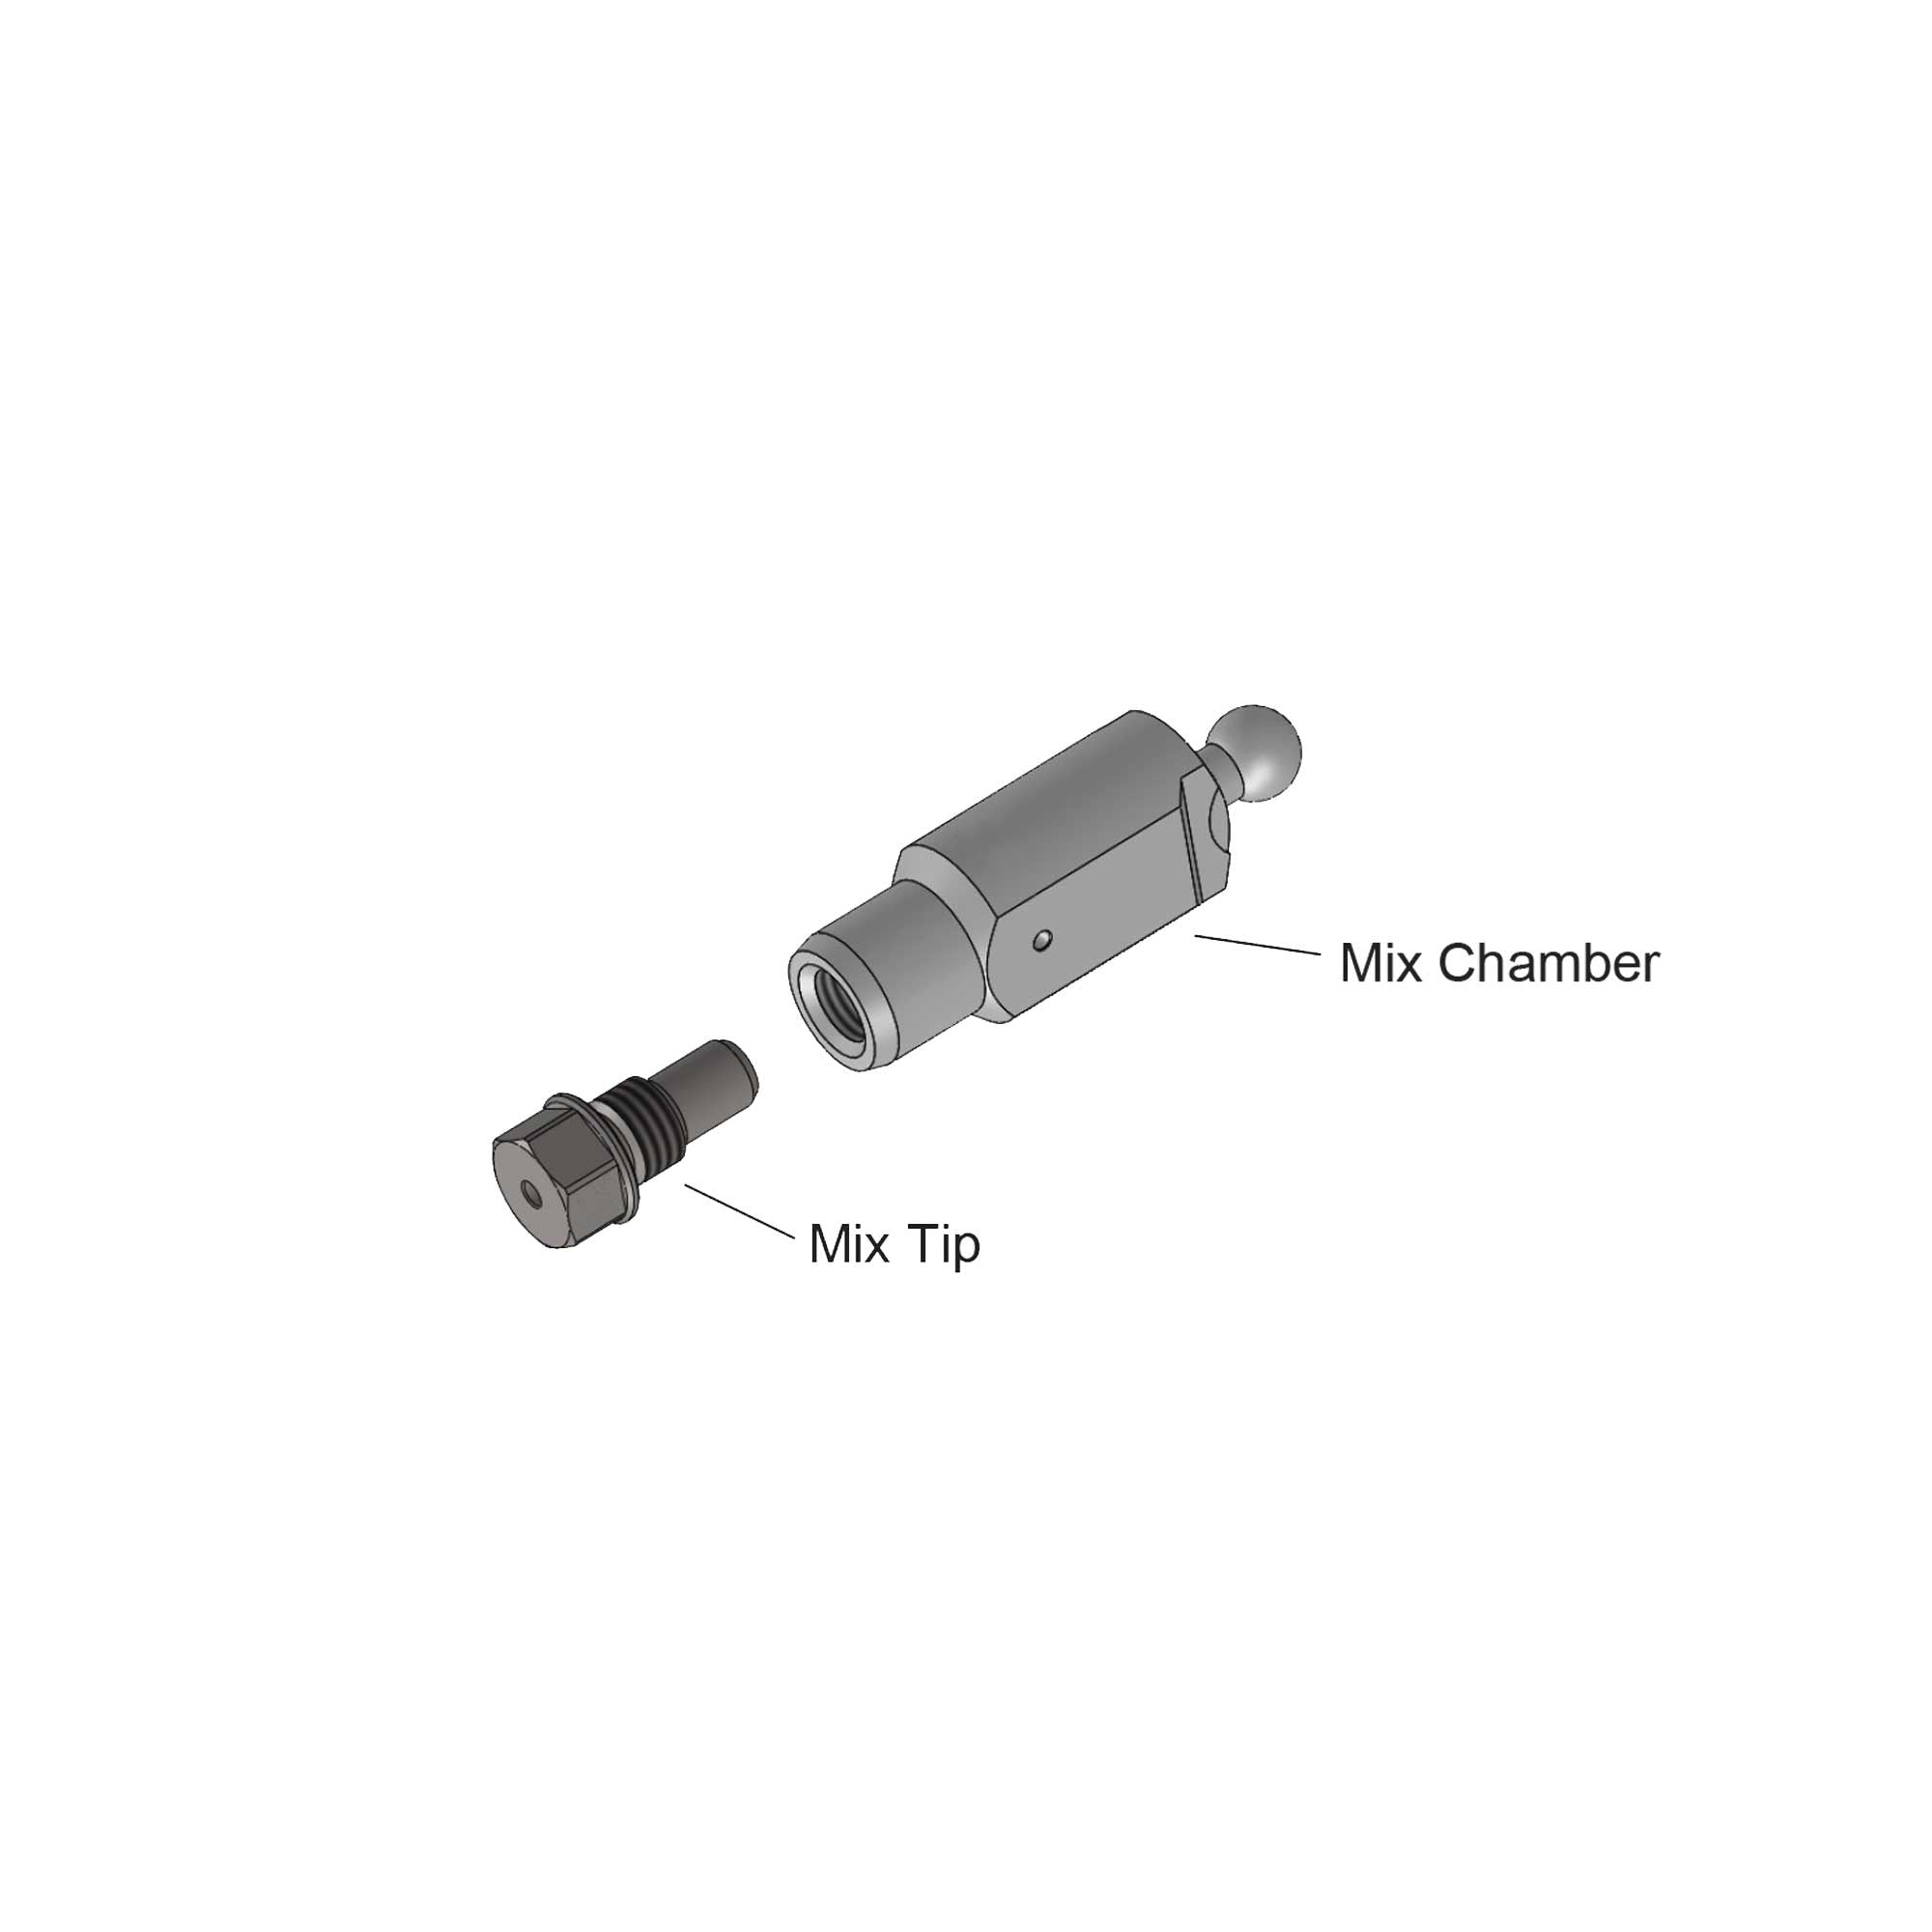 336445 - Mix Chamber F 04 and Tip Kit - PURspray